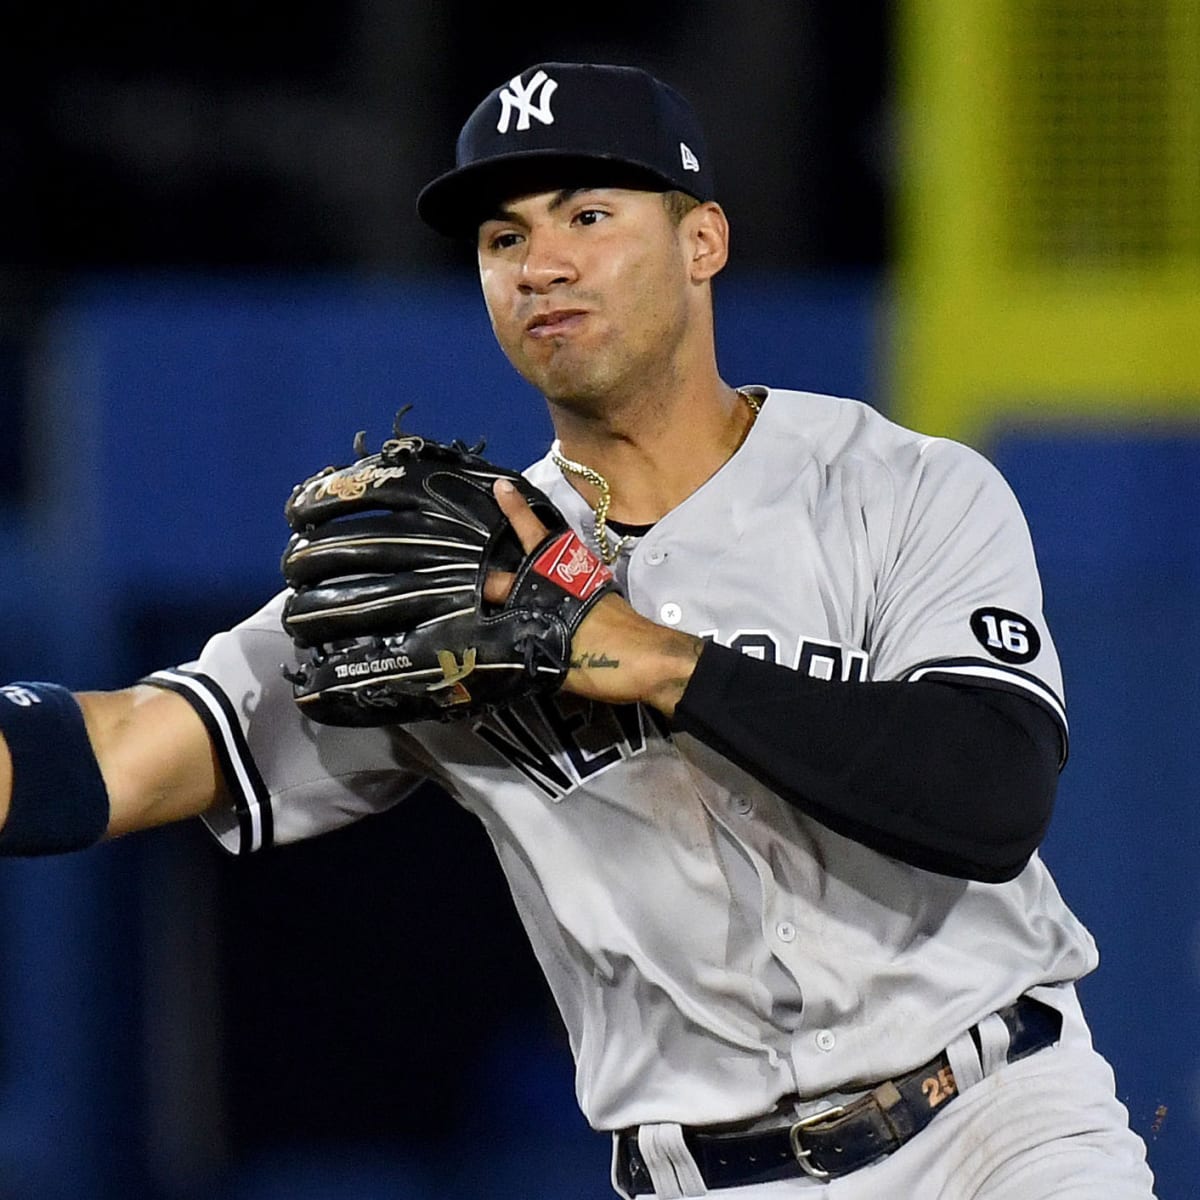 4 New York Yankees Players Test Positive for COVID in a Week